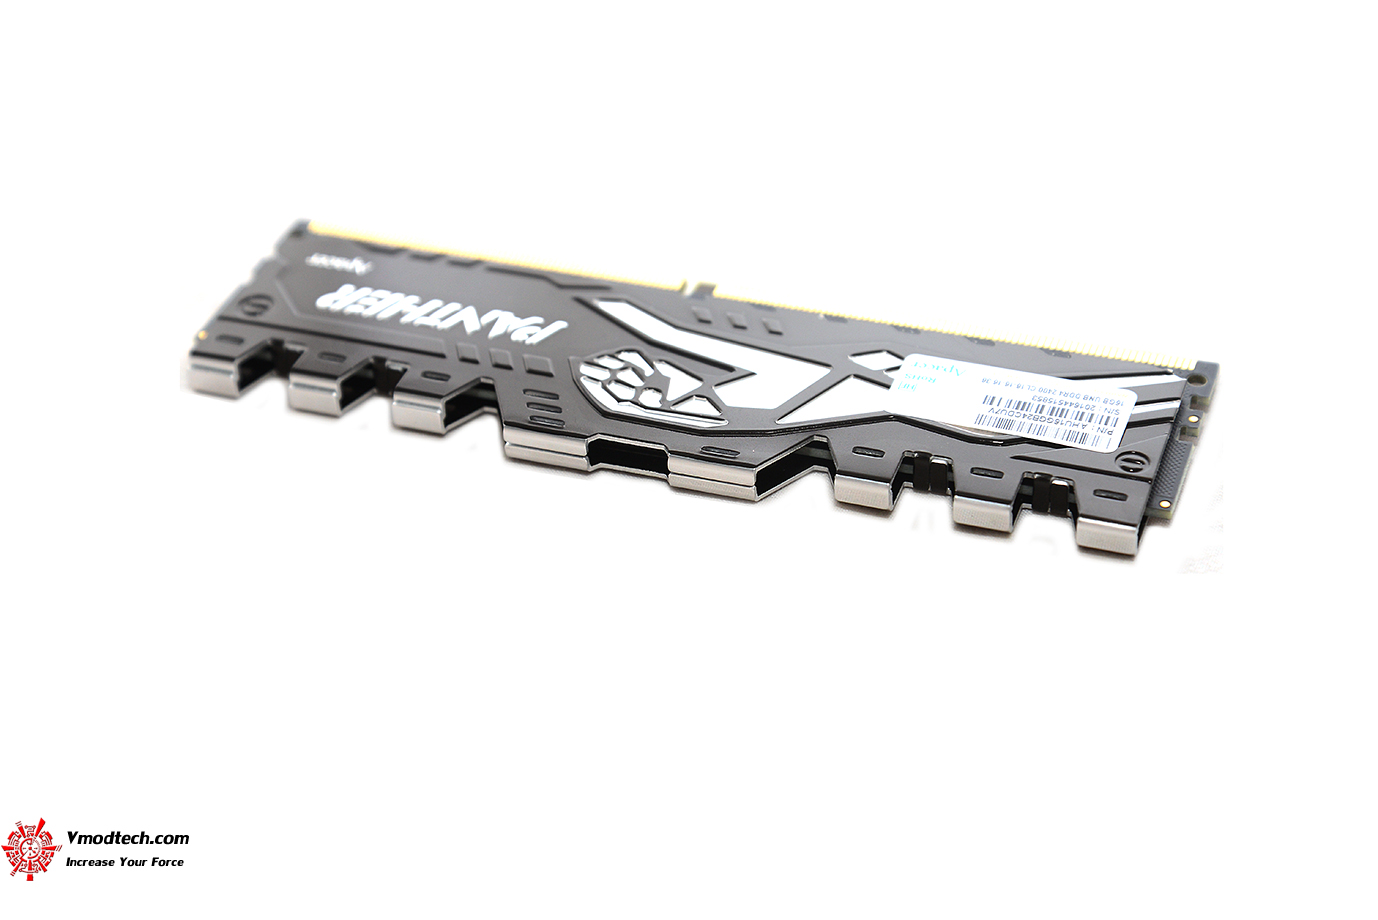 11 APACER PANTHER DDR4 2400Mhz 16GB Review 